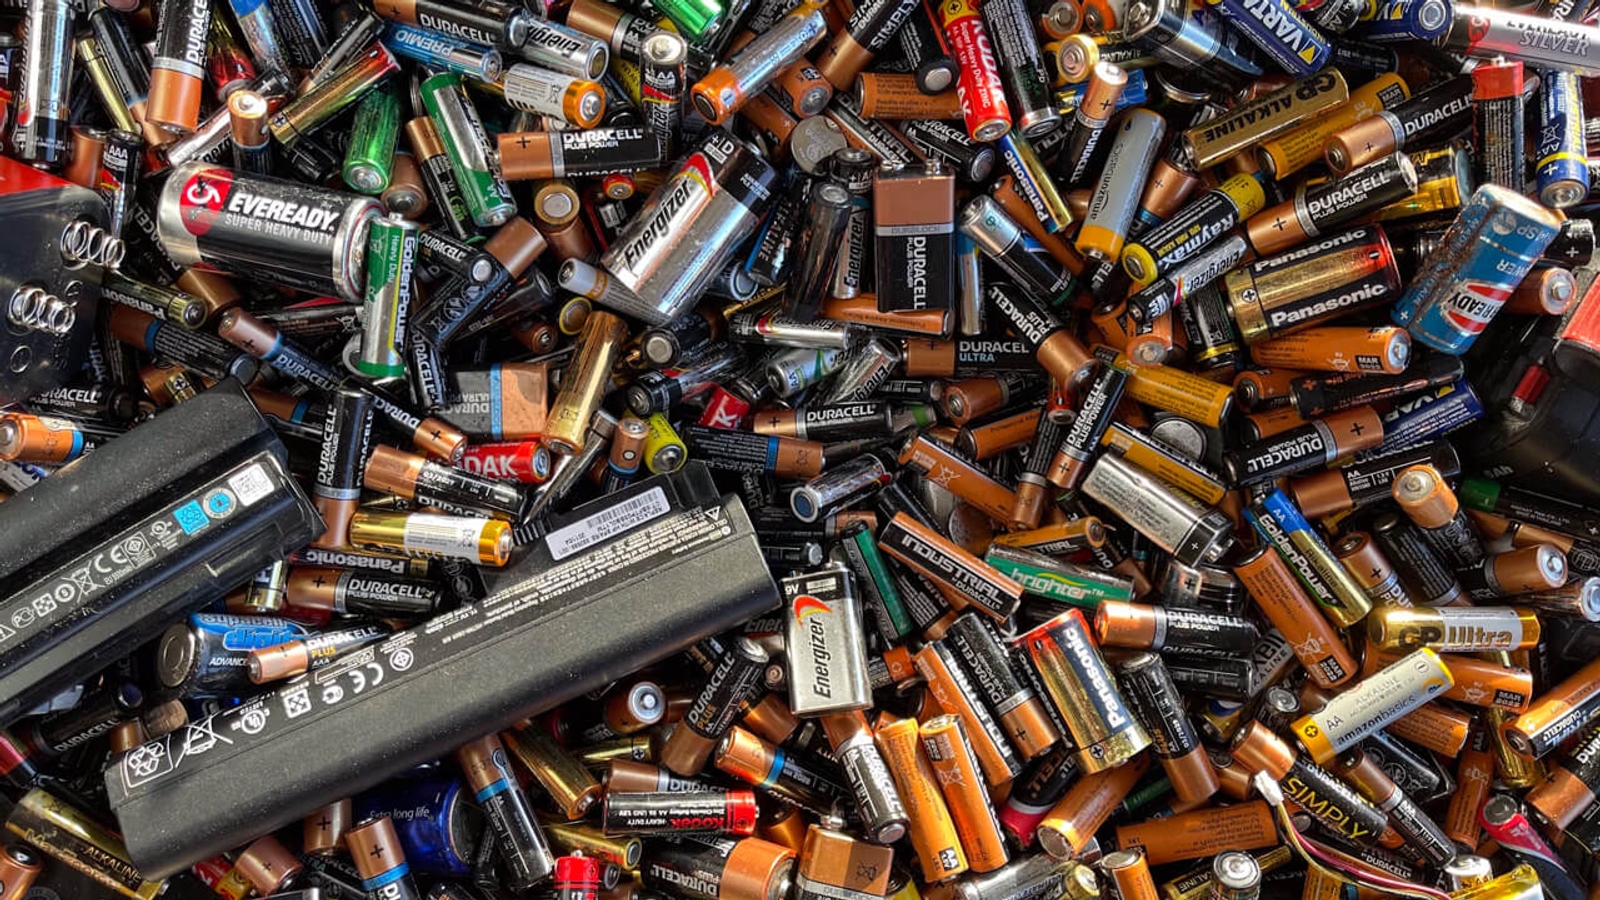 A pile of old used batteries